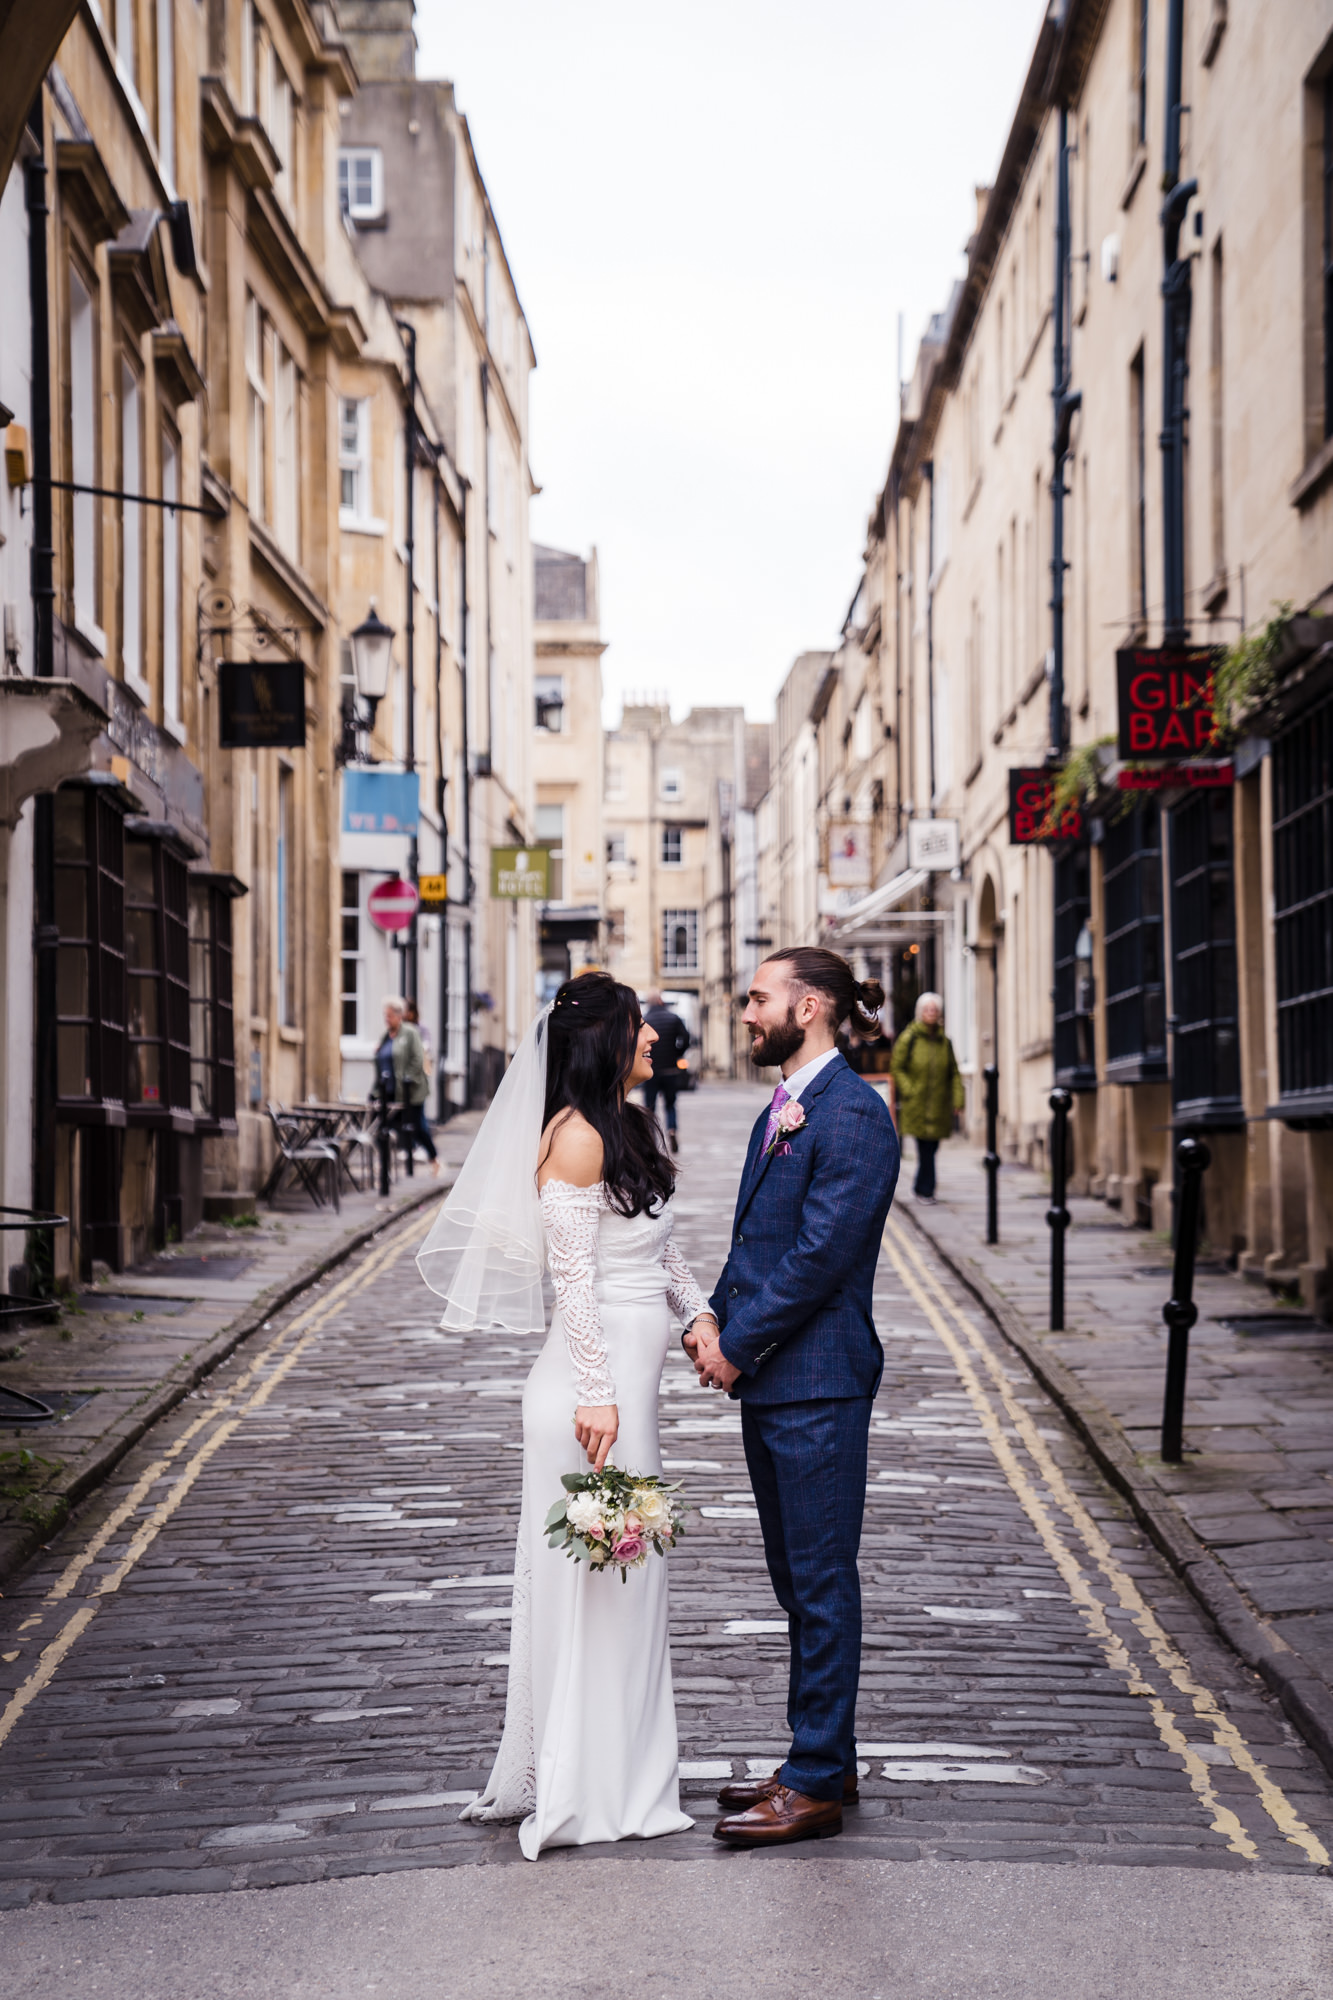 street modern photo of couple on wedding day surrounded by city shops on cobbled street